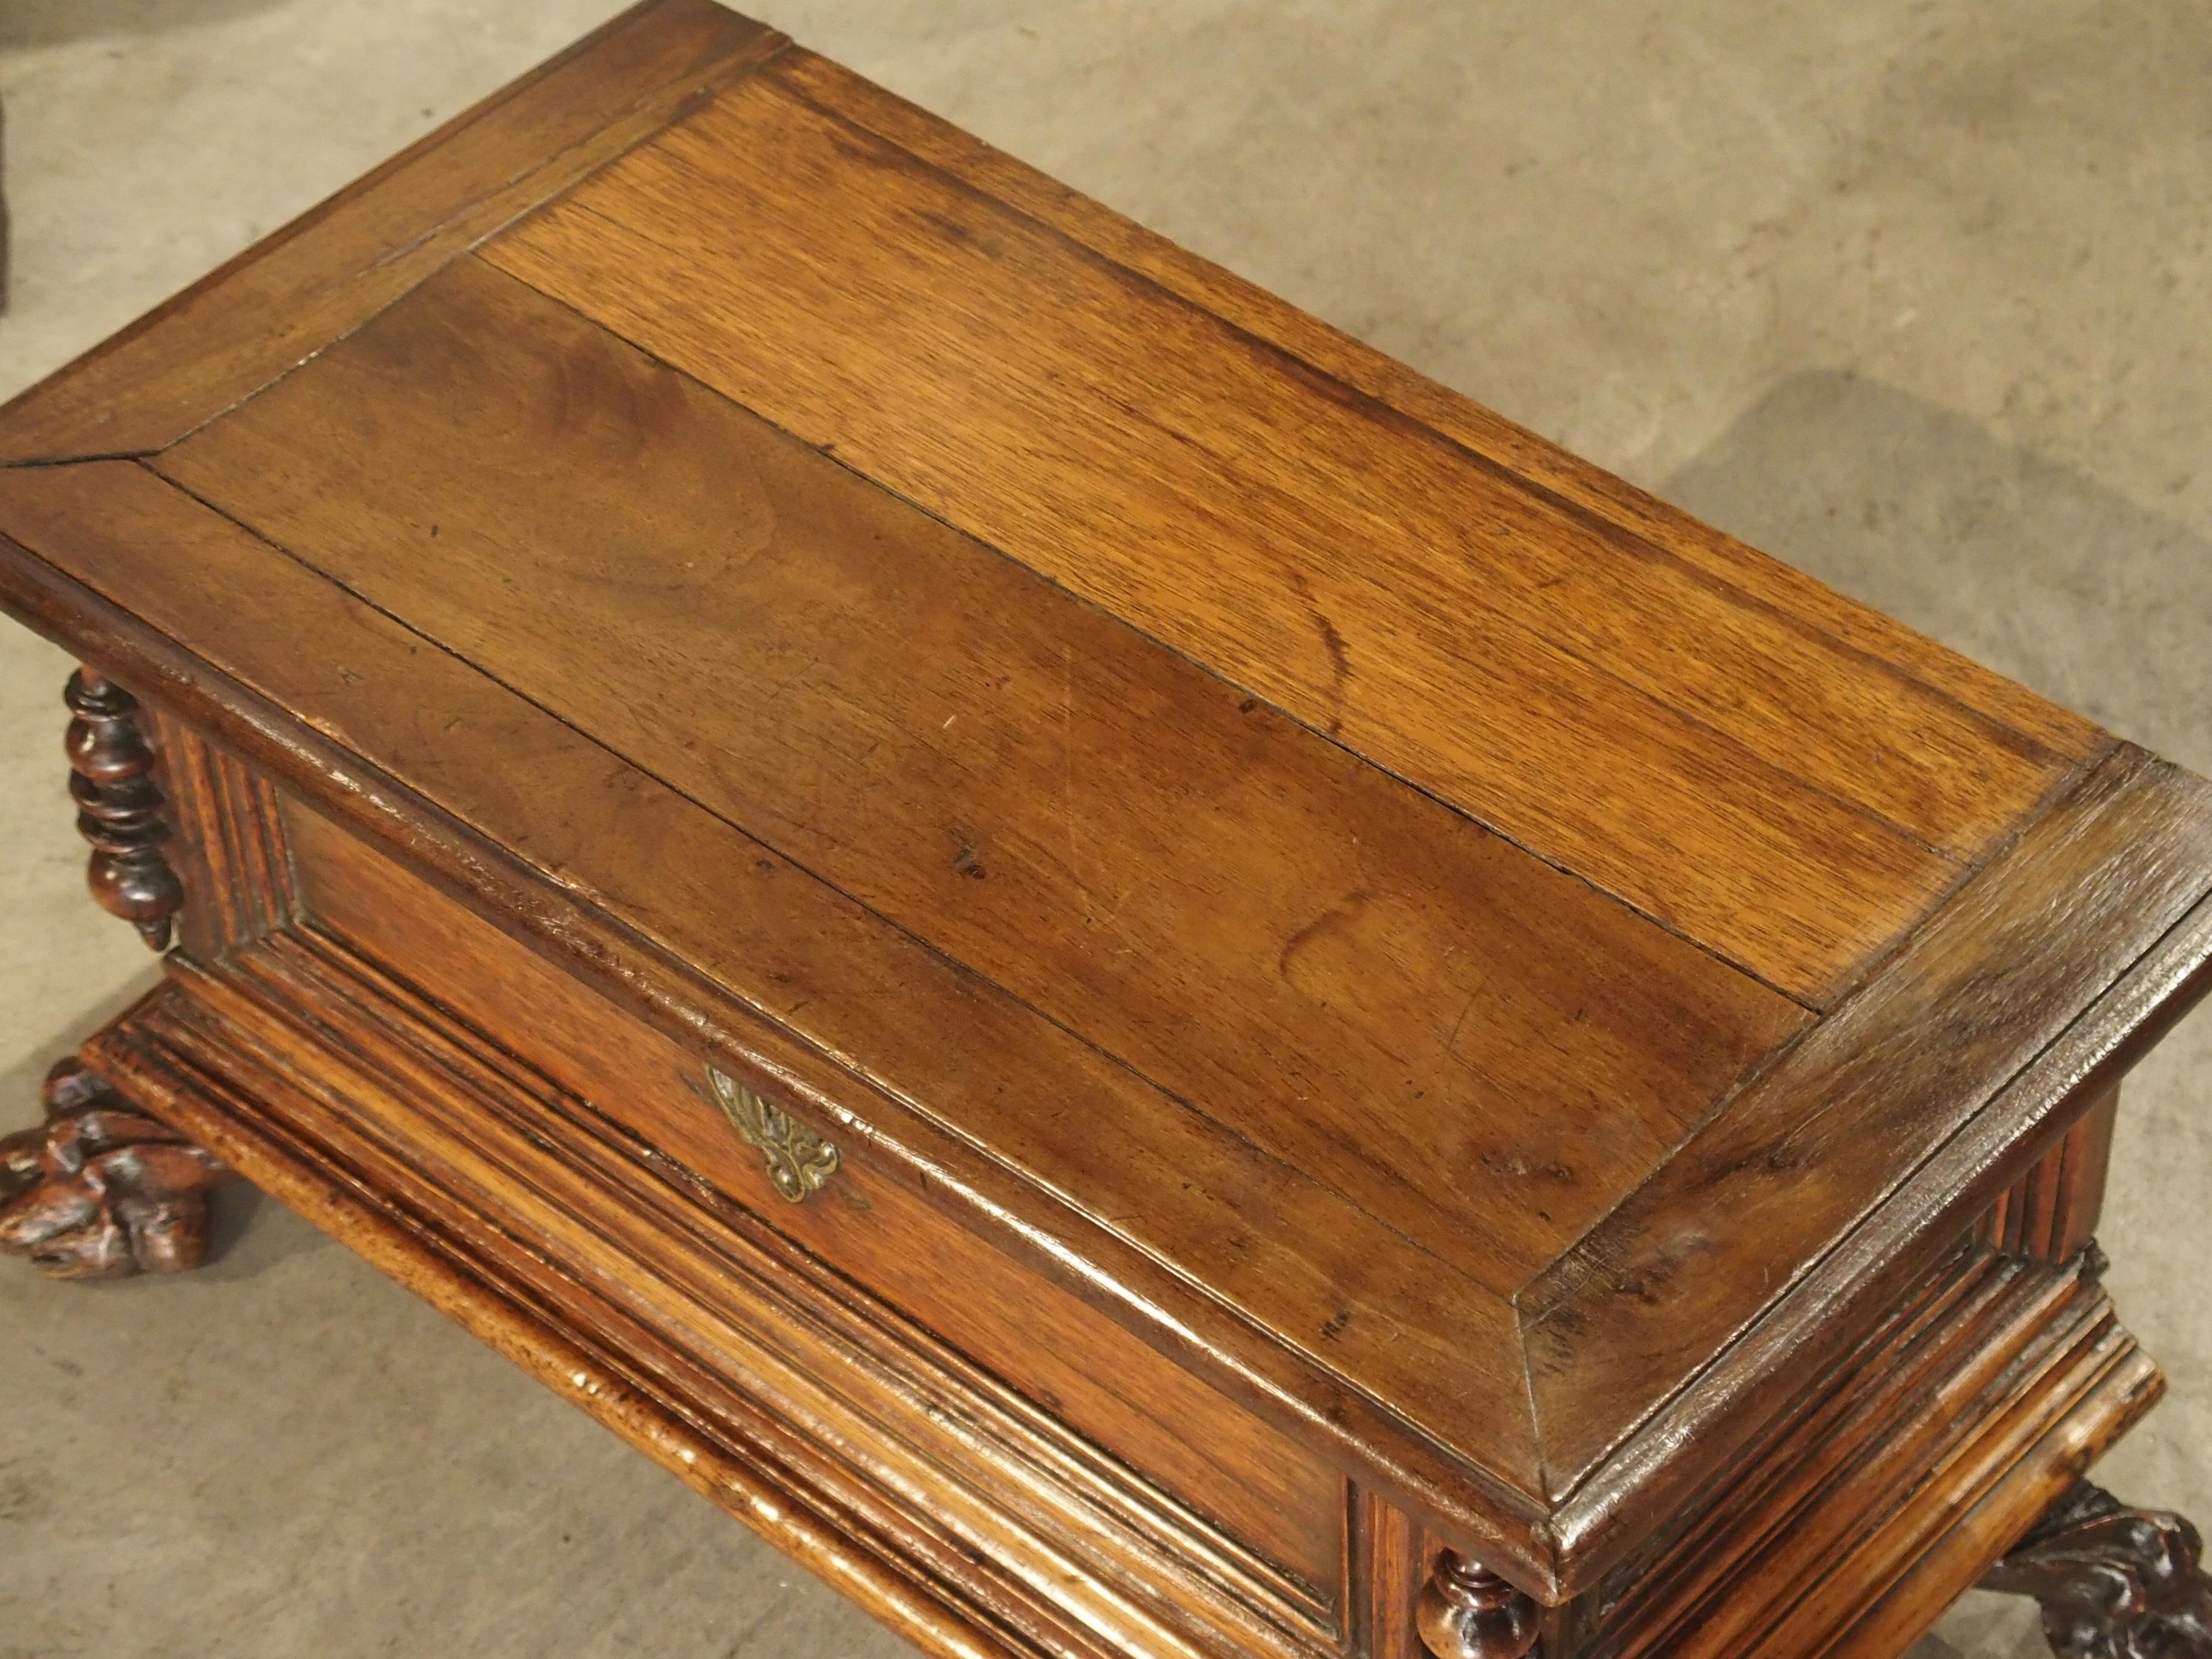 18th Century Small Antique Walnut Wood Table Trunk from Northern Italy, circa 1700